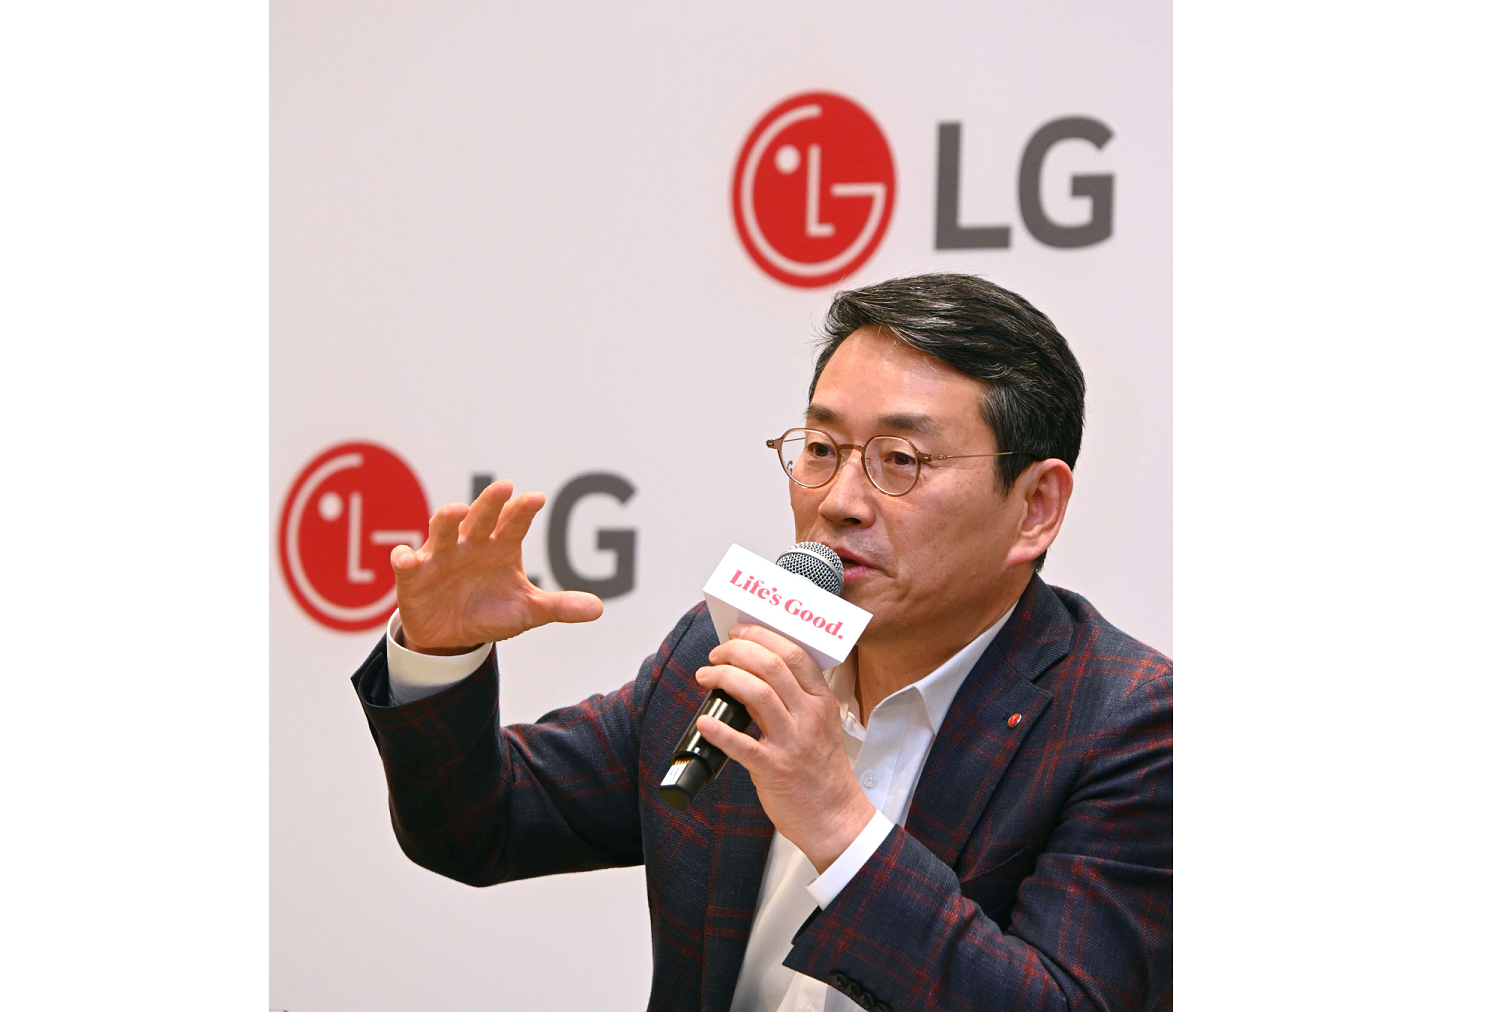 A photo of LG CEO William Cho speaking while holding a mic